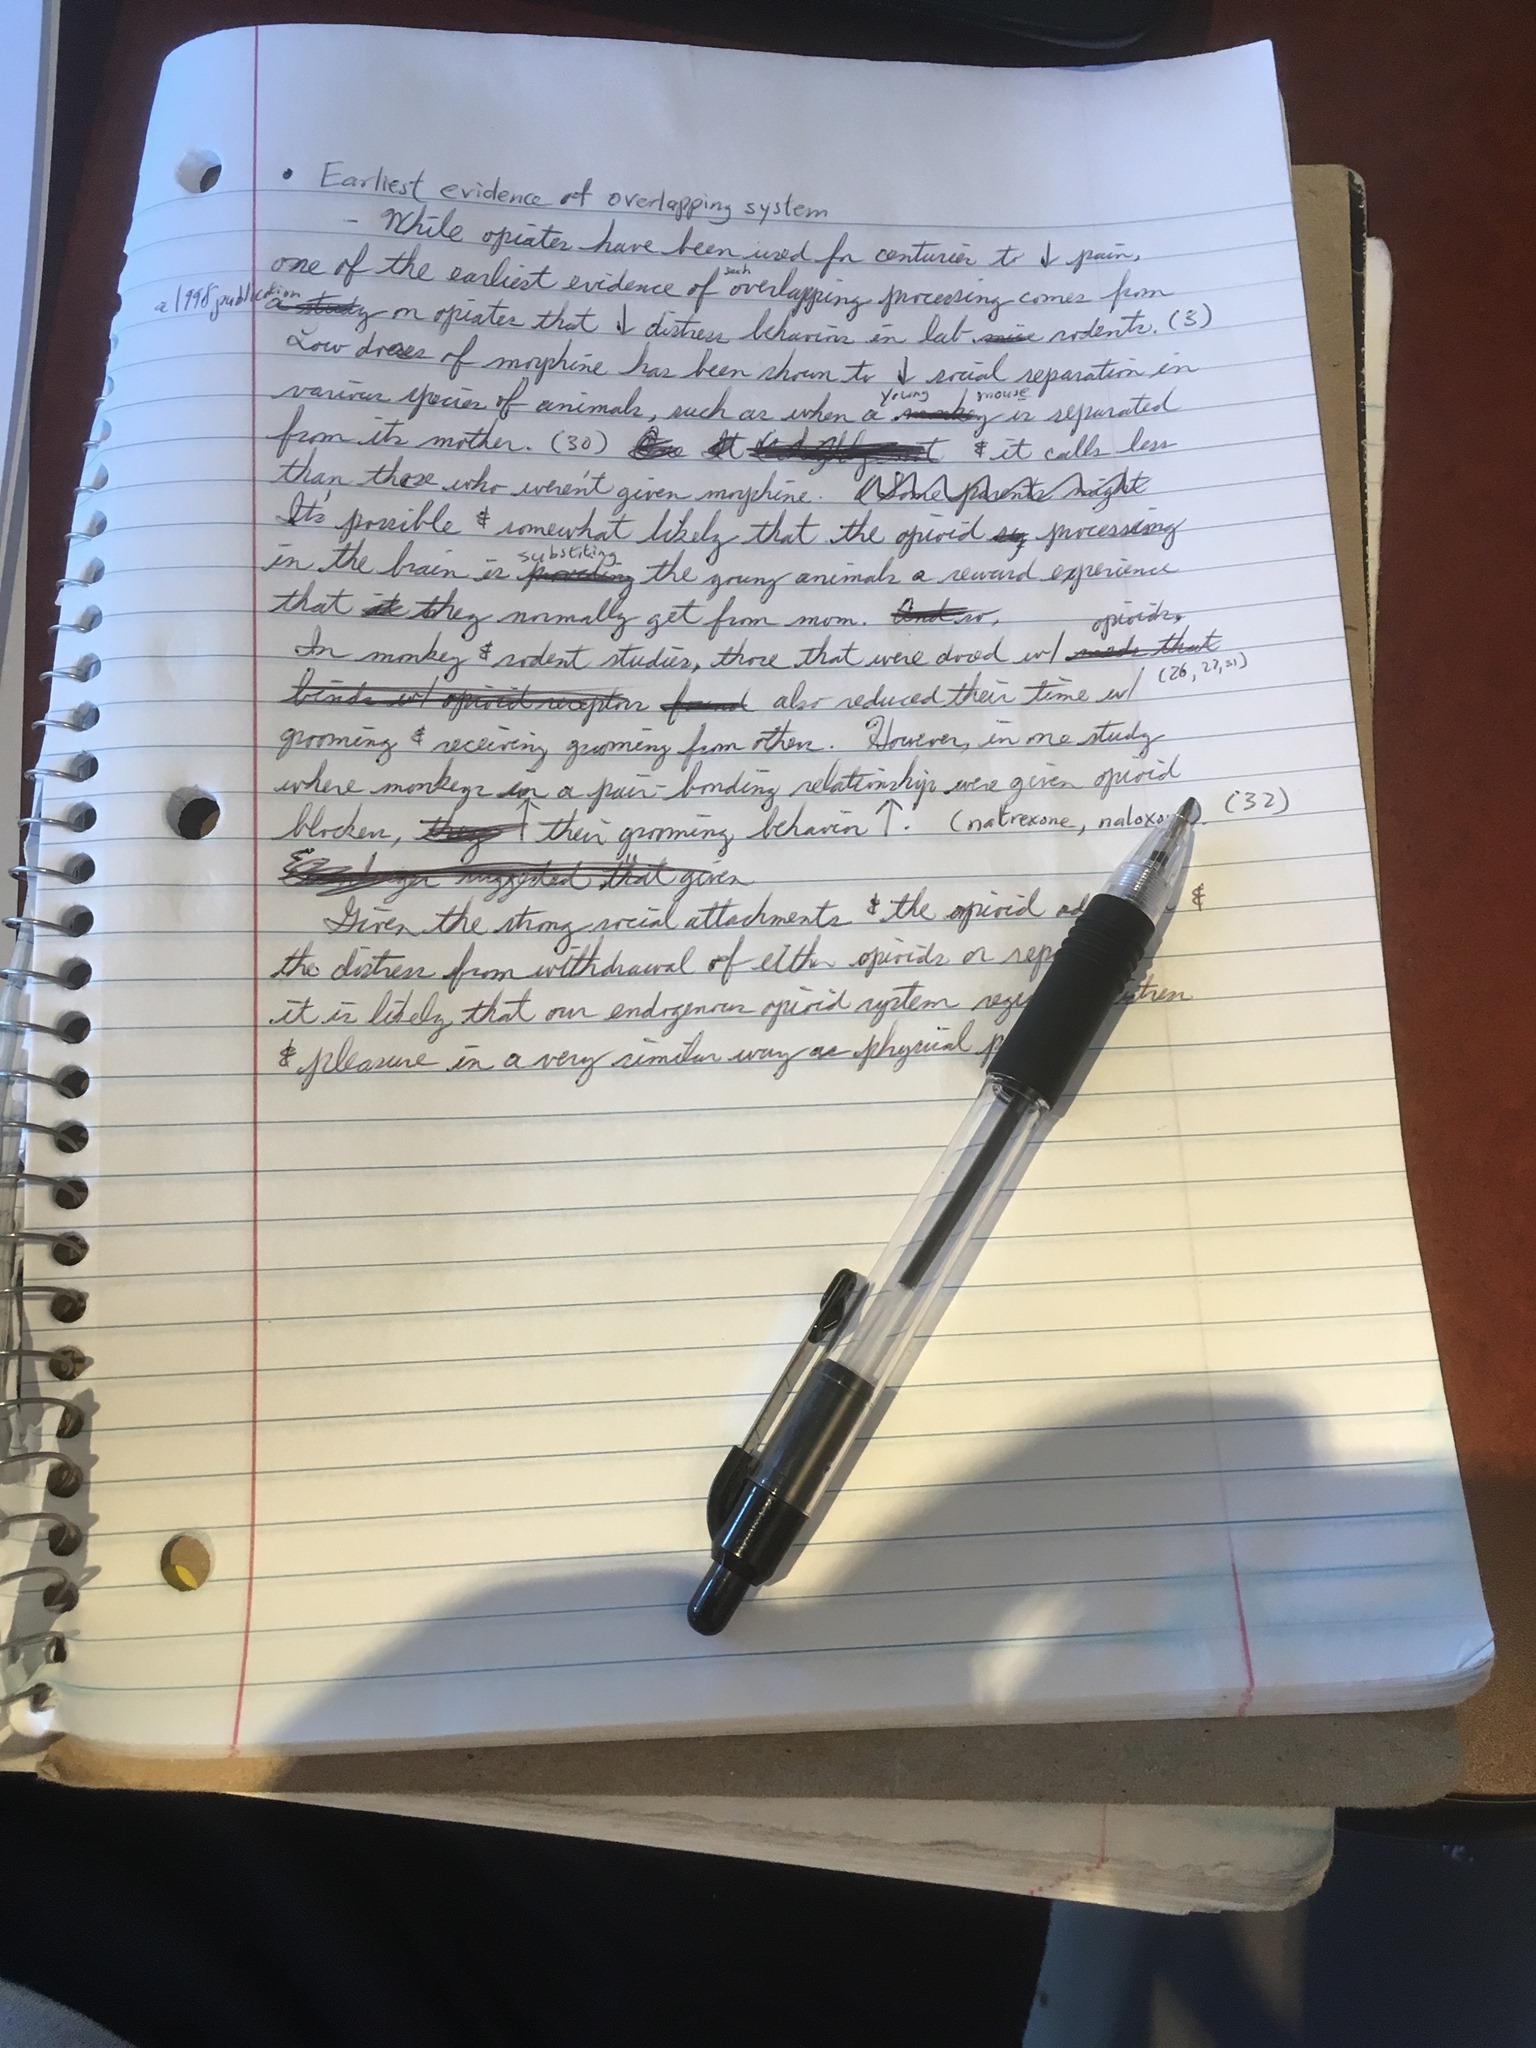 The initial stage of writing is often messy and full of errors, but that's okay and it allows your thoughts to flow through your pen or keyboard, minimizing writer's block. (Photo courtesy of Nick Ng)